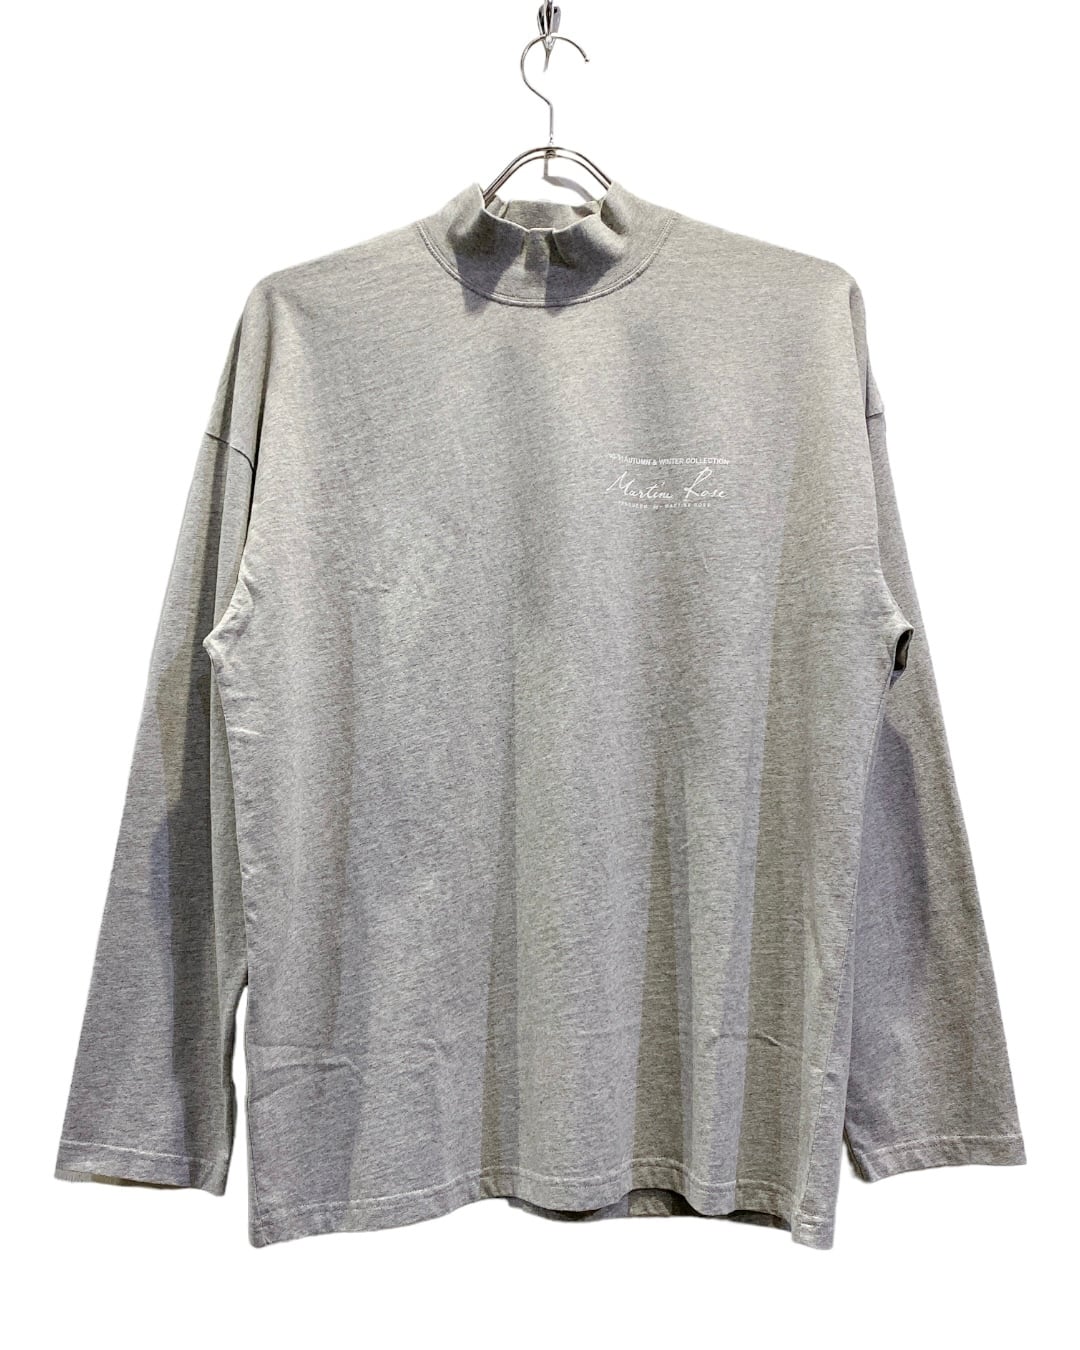 MARTINE ROSE / FUNNEL NECK T-SHIRT | Answer